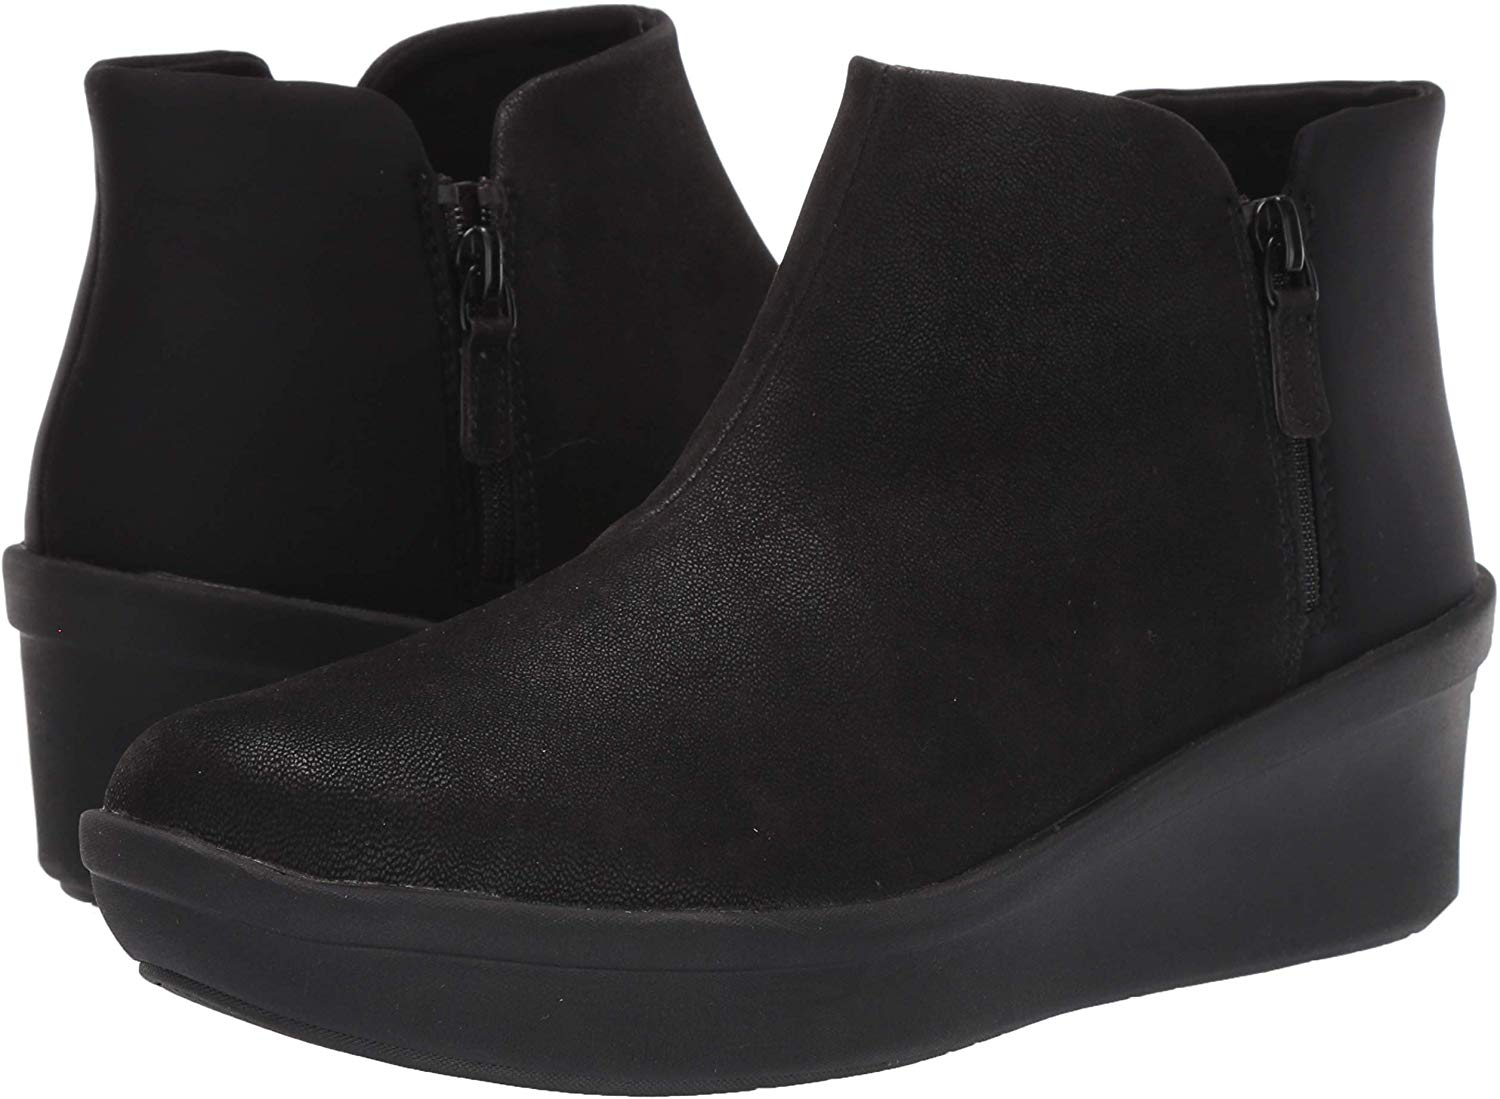 Clarks Women's Shoes Step Rose Up Leather Closed Toe, Black Textile ...